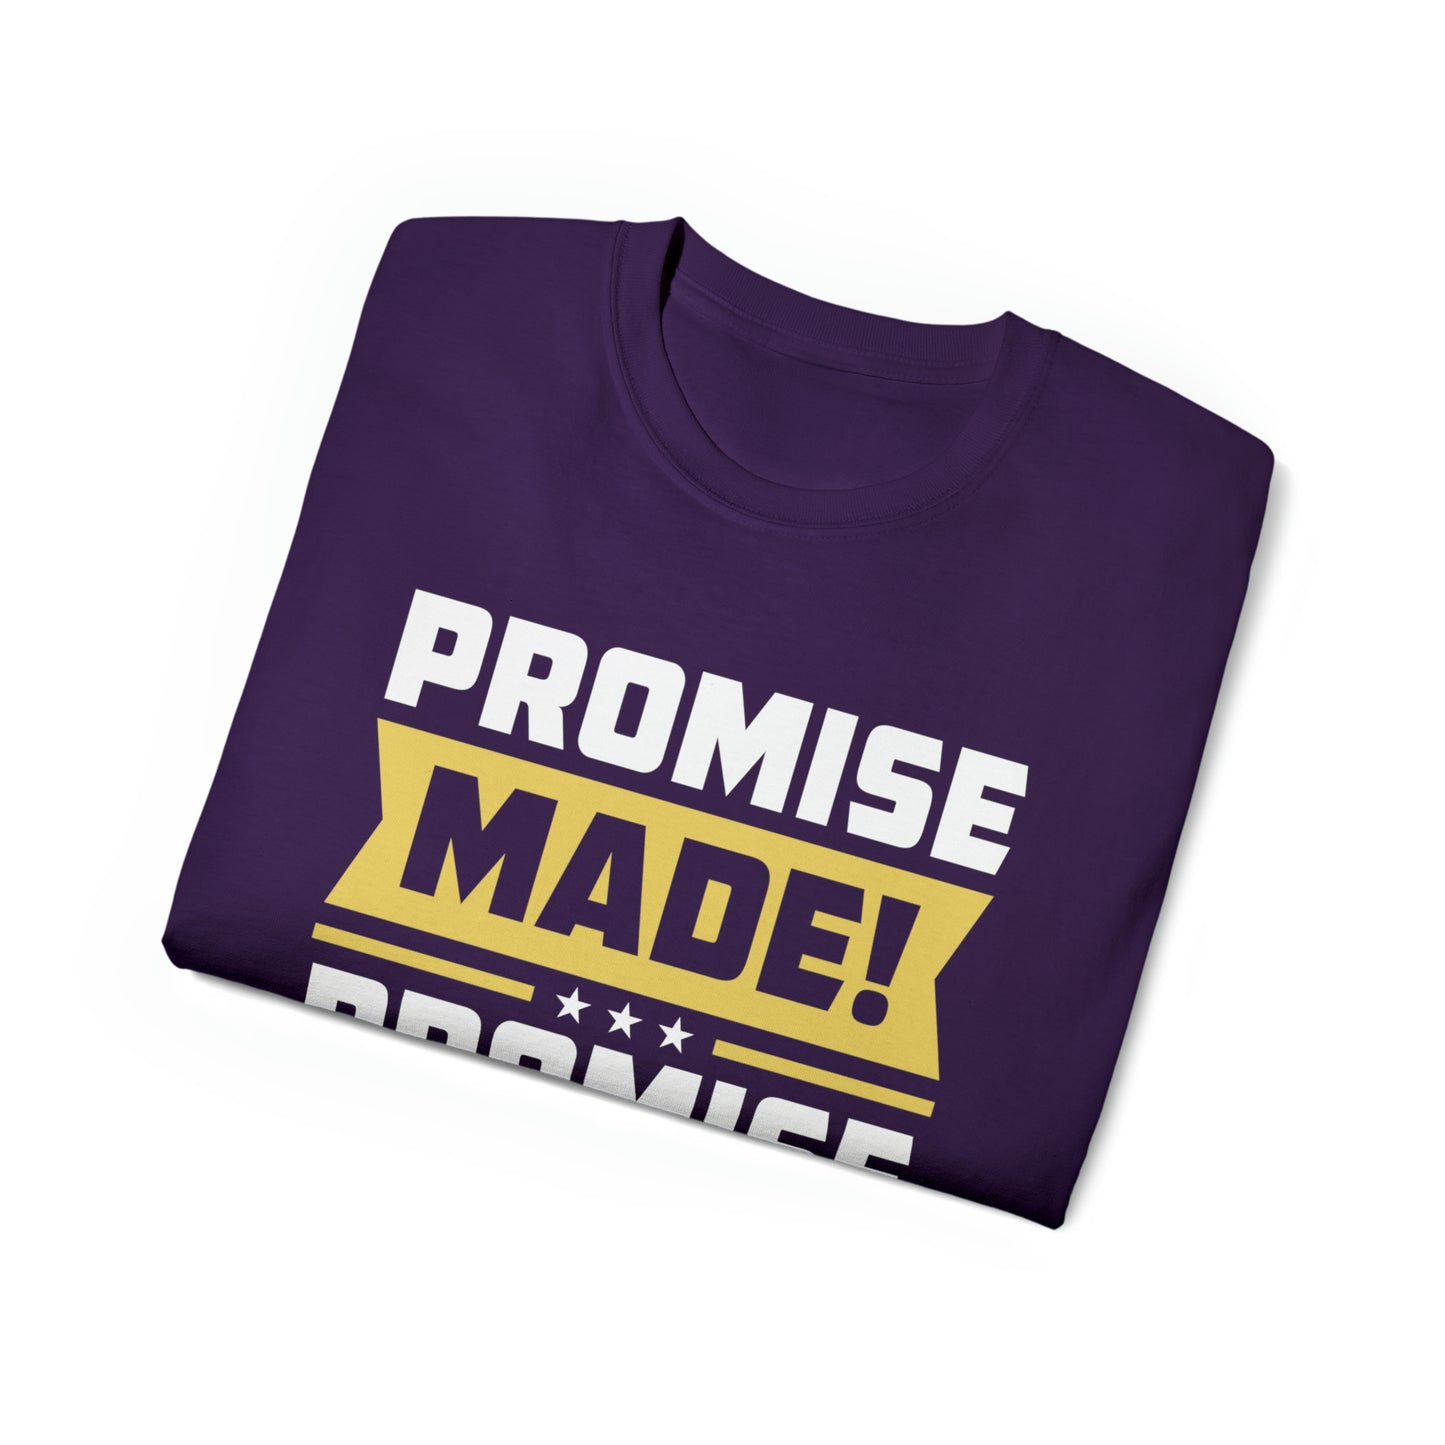 PROMISE MADE! PROMISE KEPT! TEE